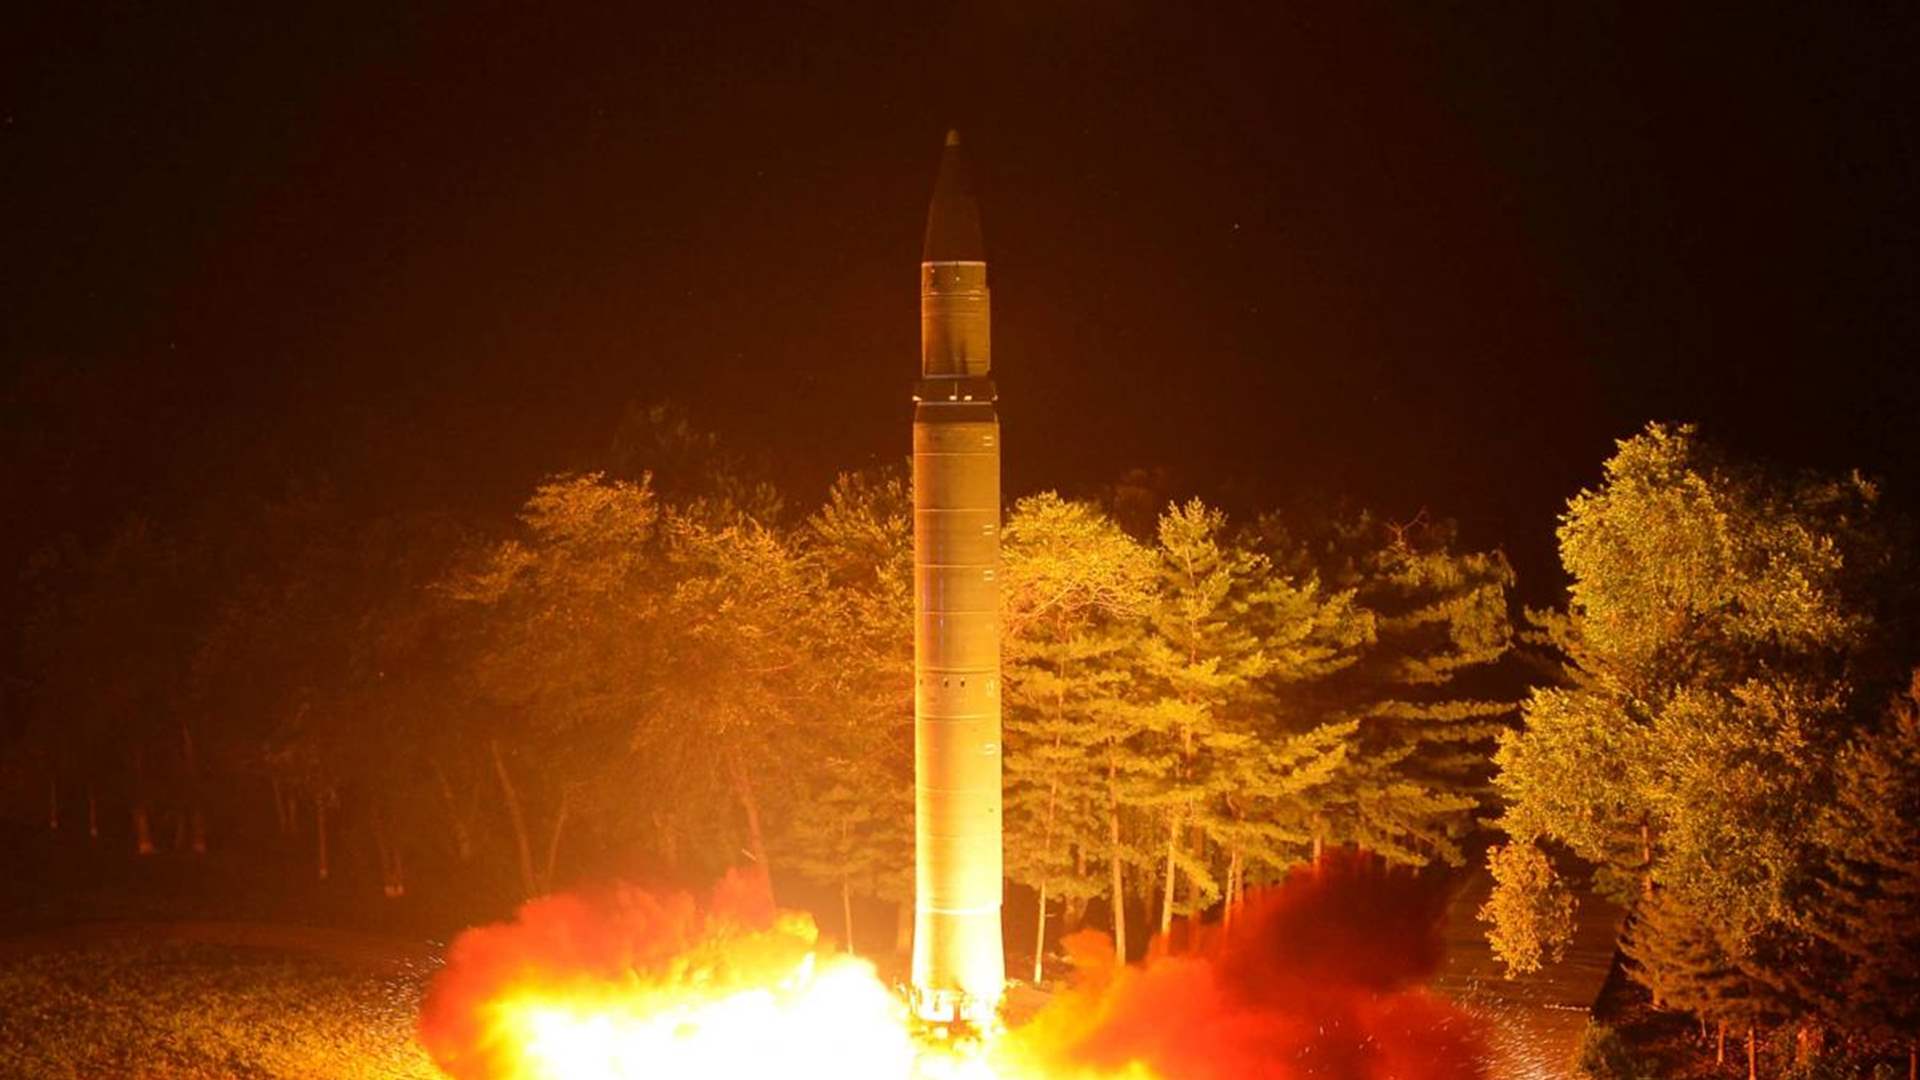 North Korea conducts missile tests ahead of Korean war anniversary celebrations attended by high-level Chinese delegation